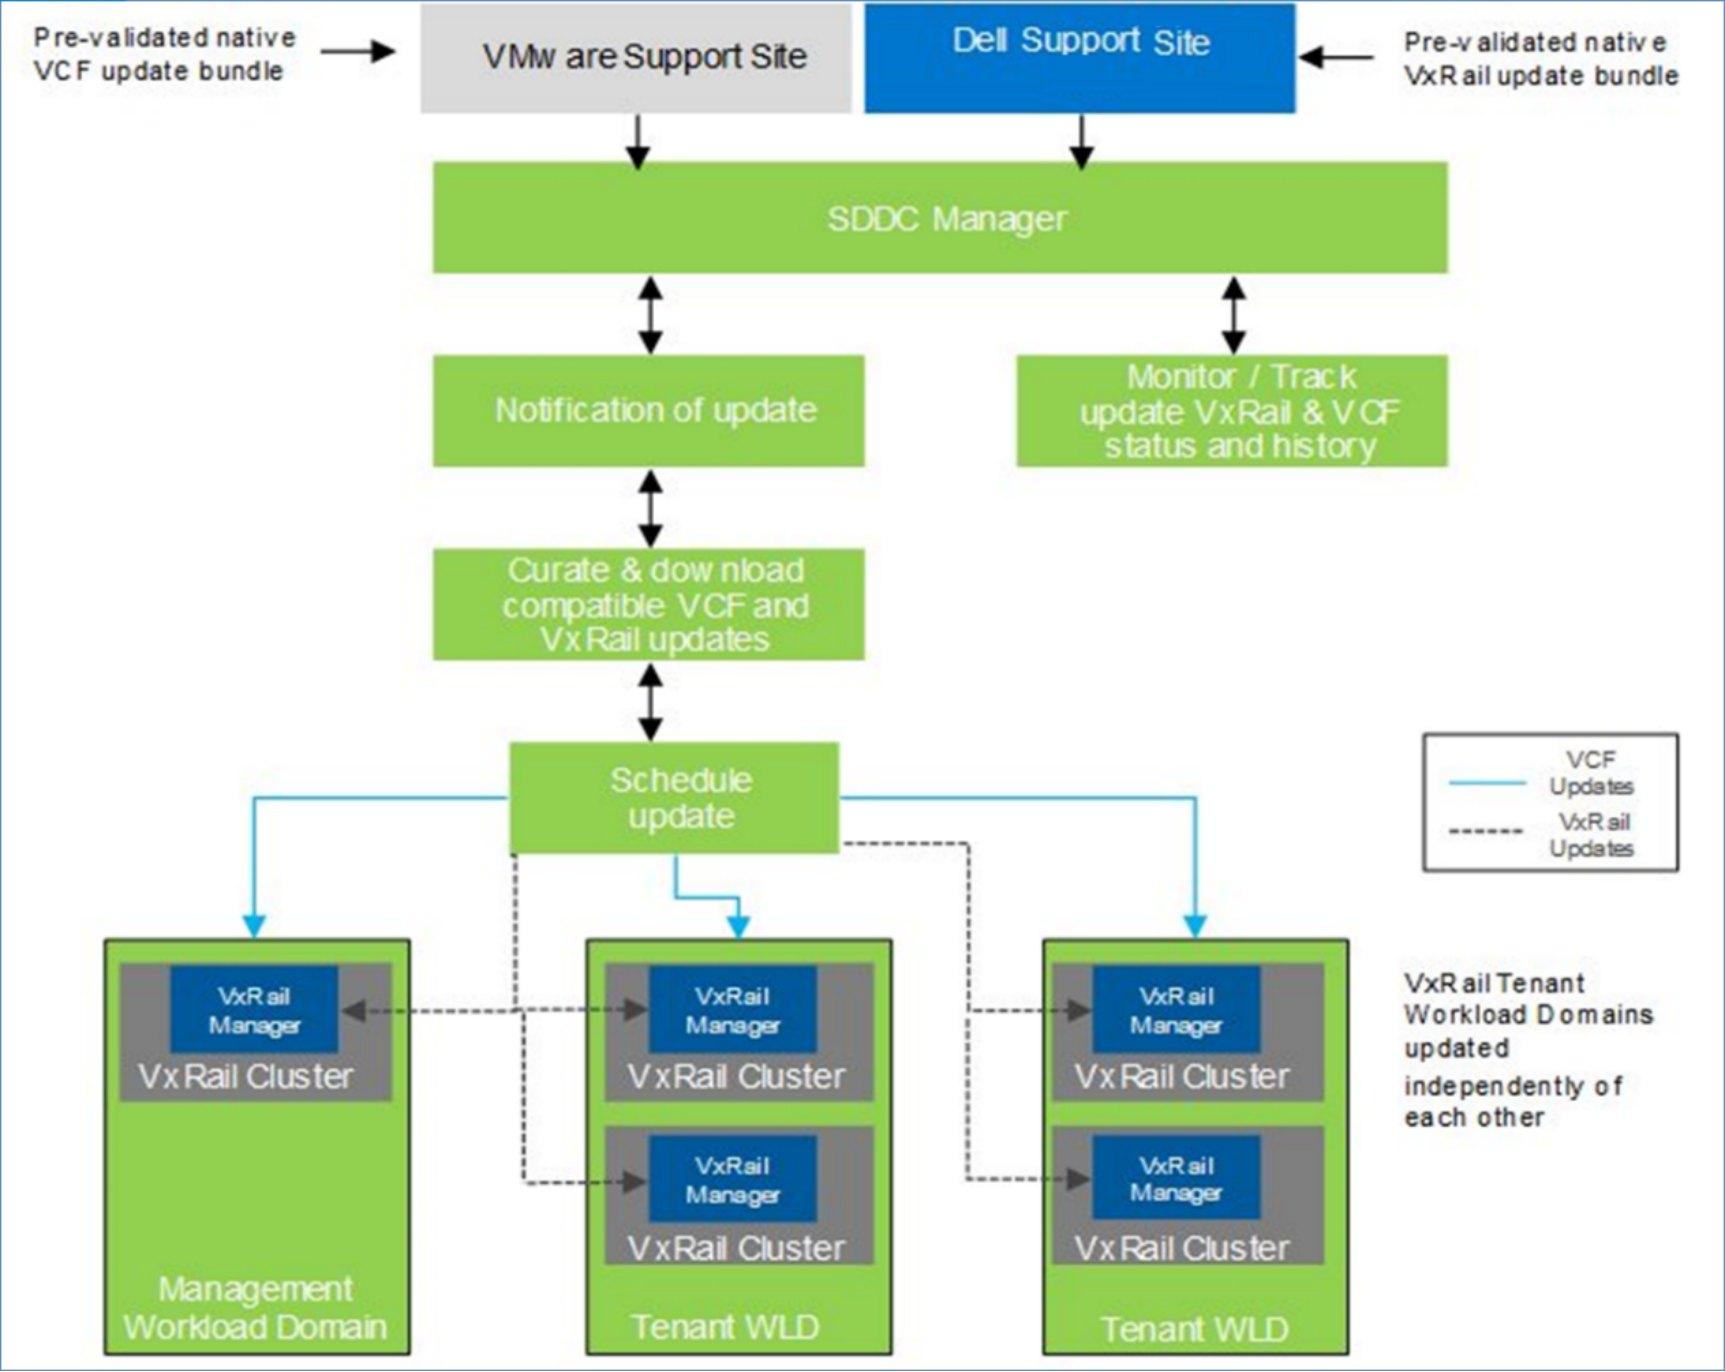 This figure shows the VCF on VxRail LCM components.